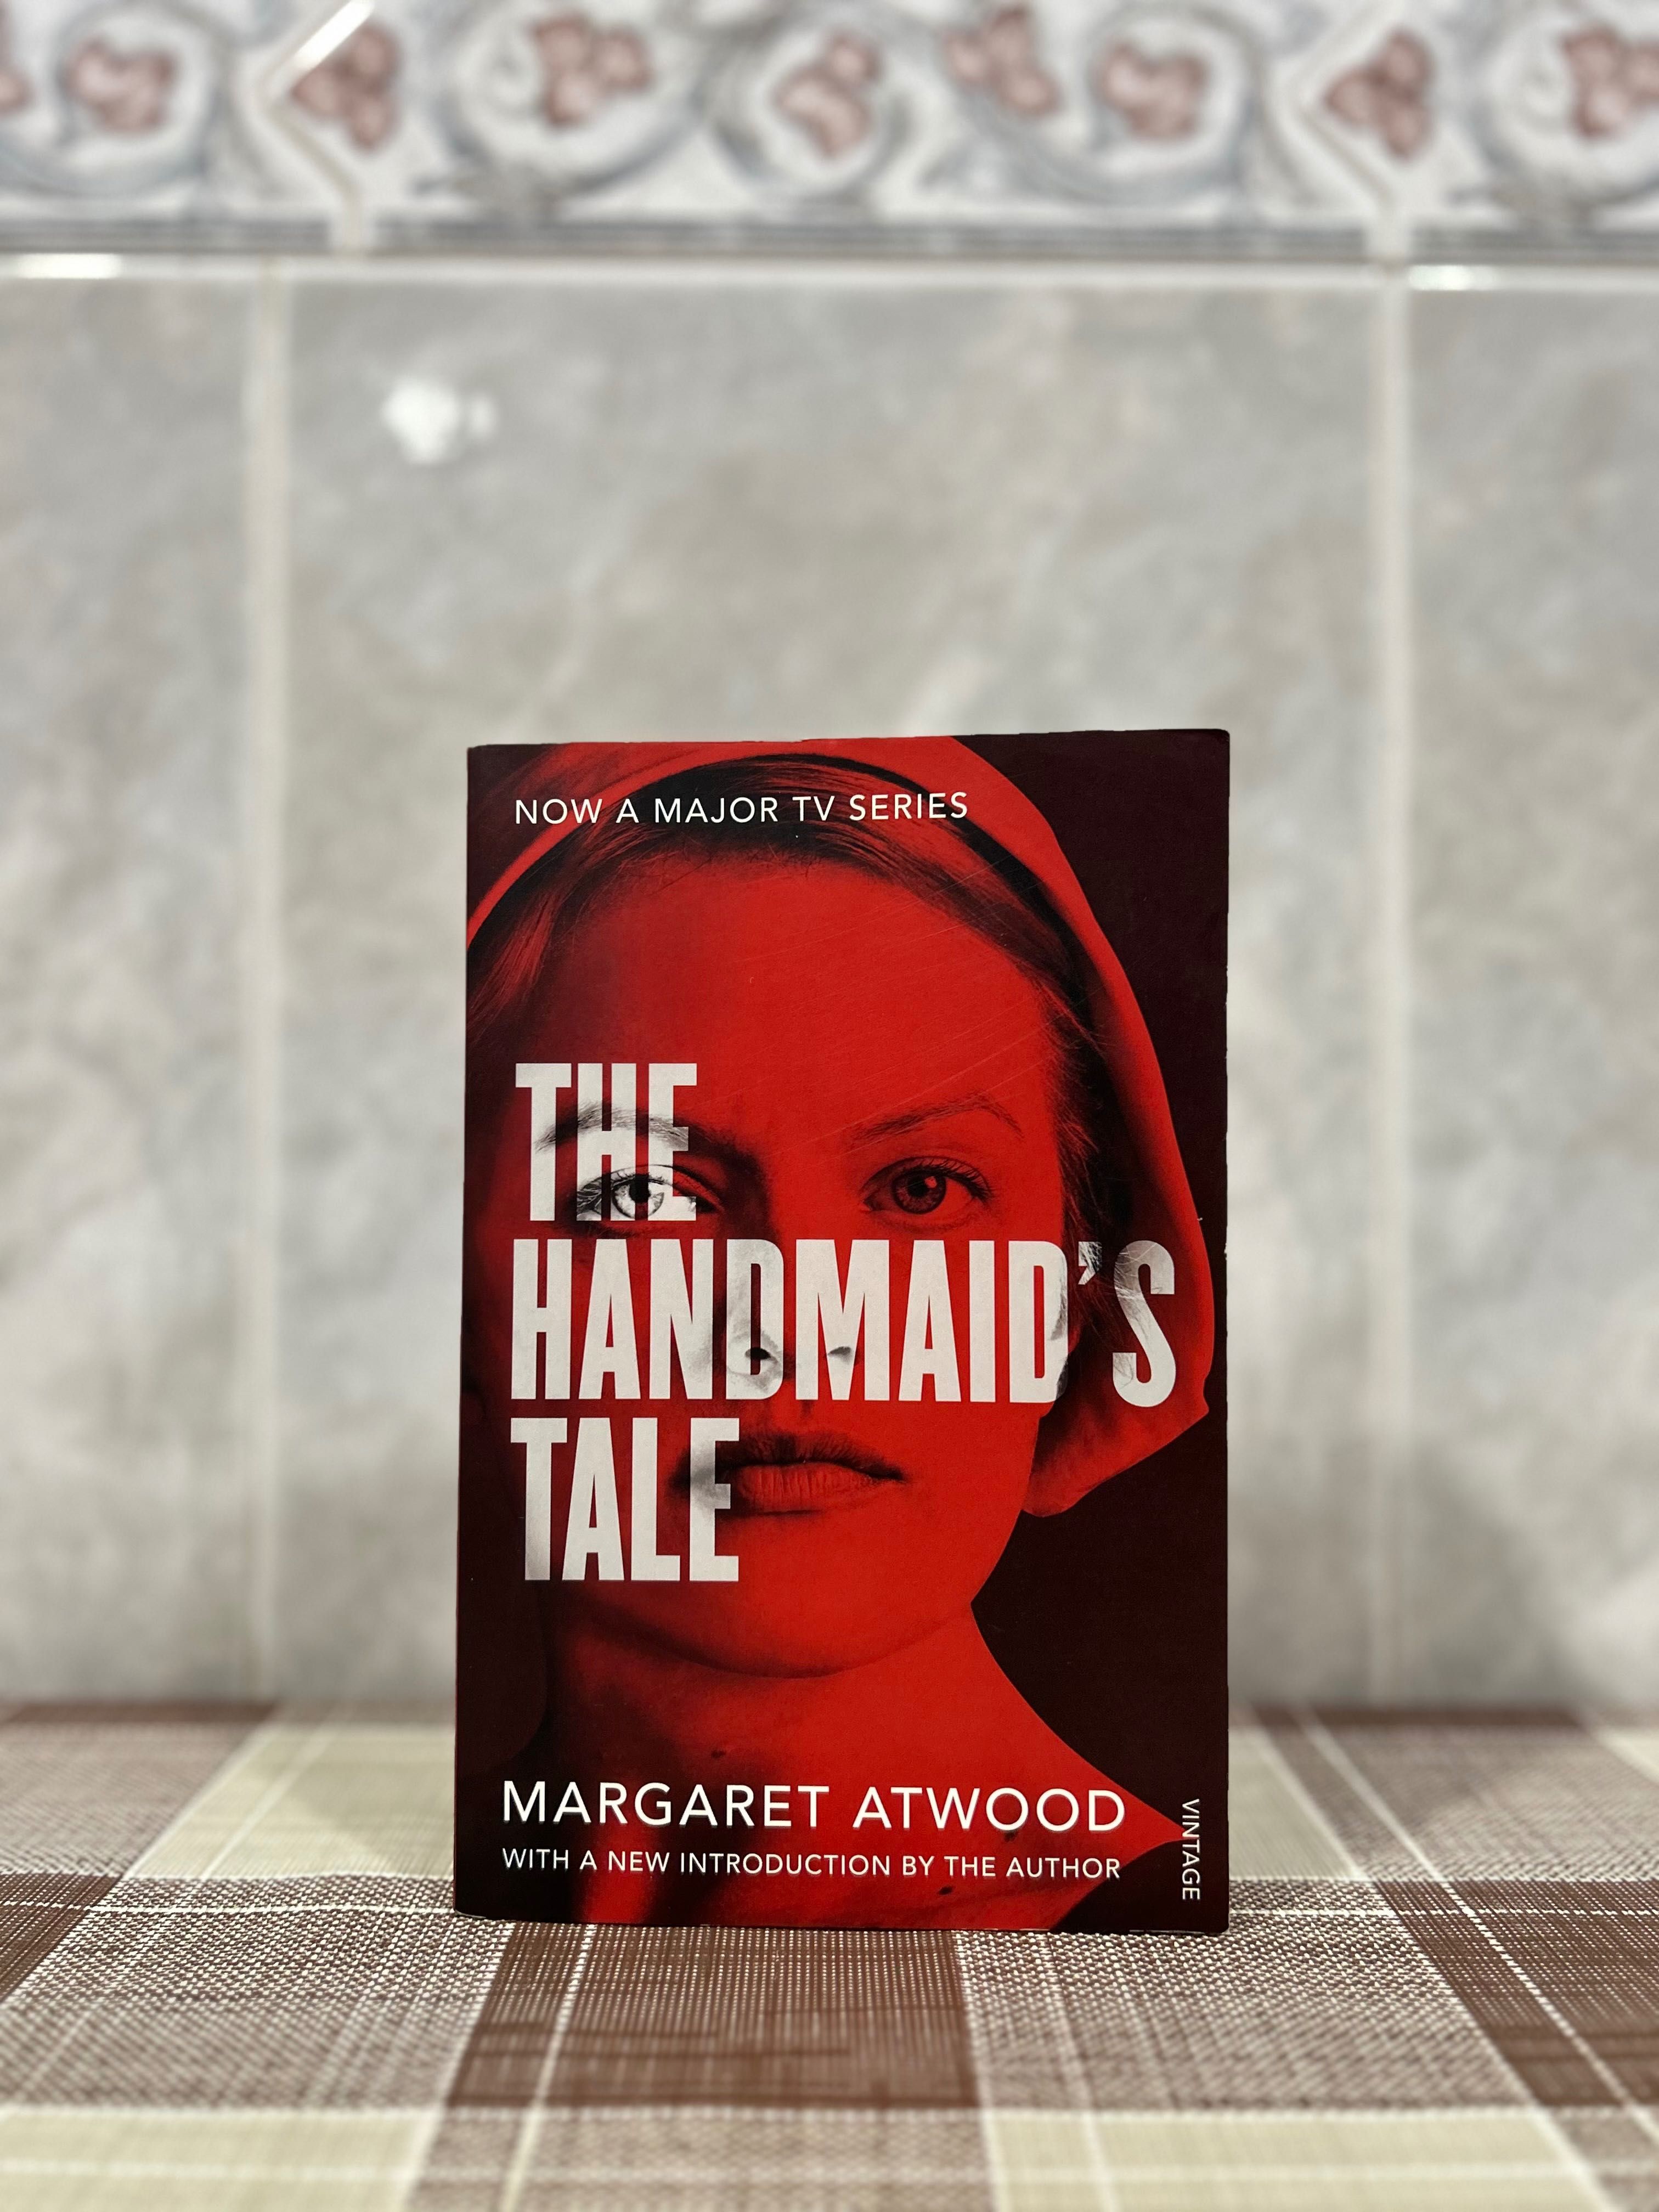 The Handmaid’s Tale (Inglês) - Margaret Atwood.